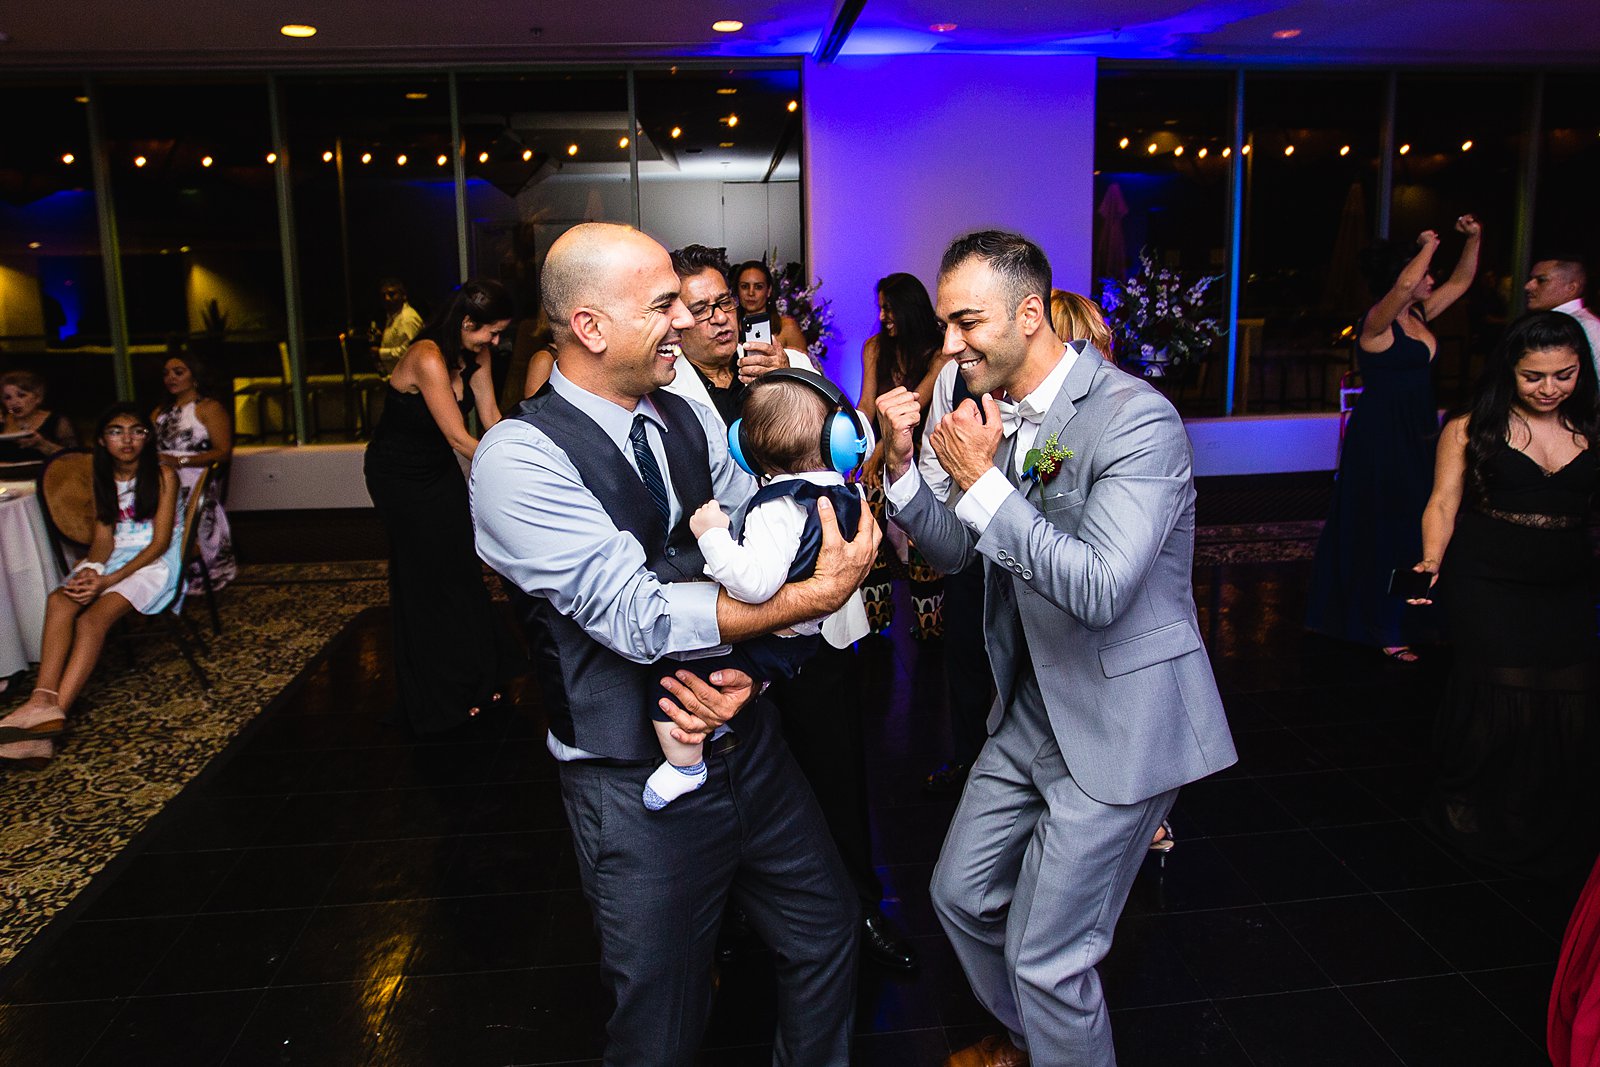 Groom dancing with son and guests at Troon North wedding reception by Scottsdale wedding photographer PMA Photography